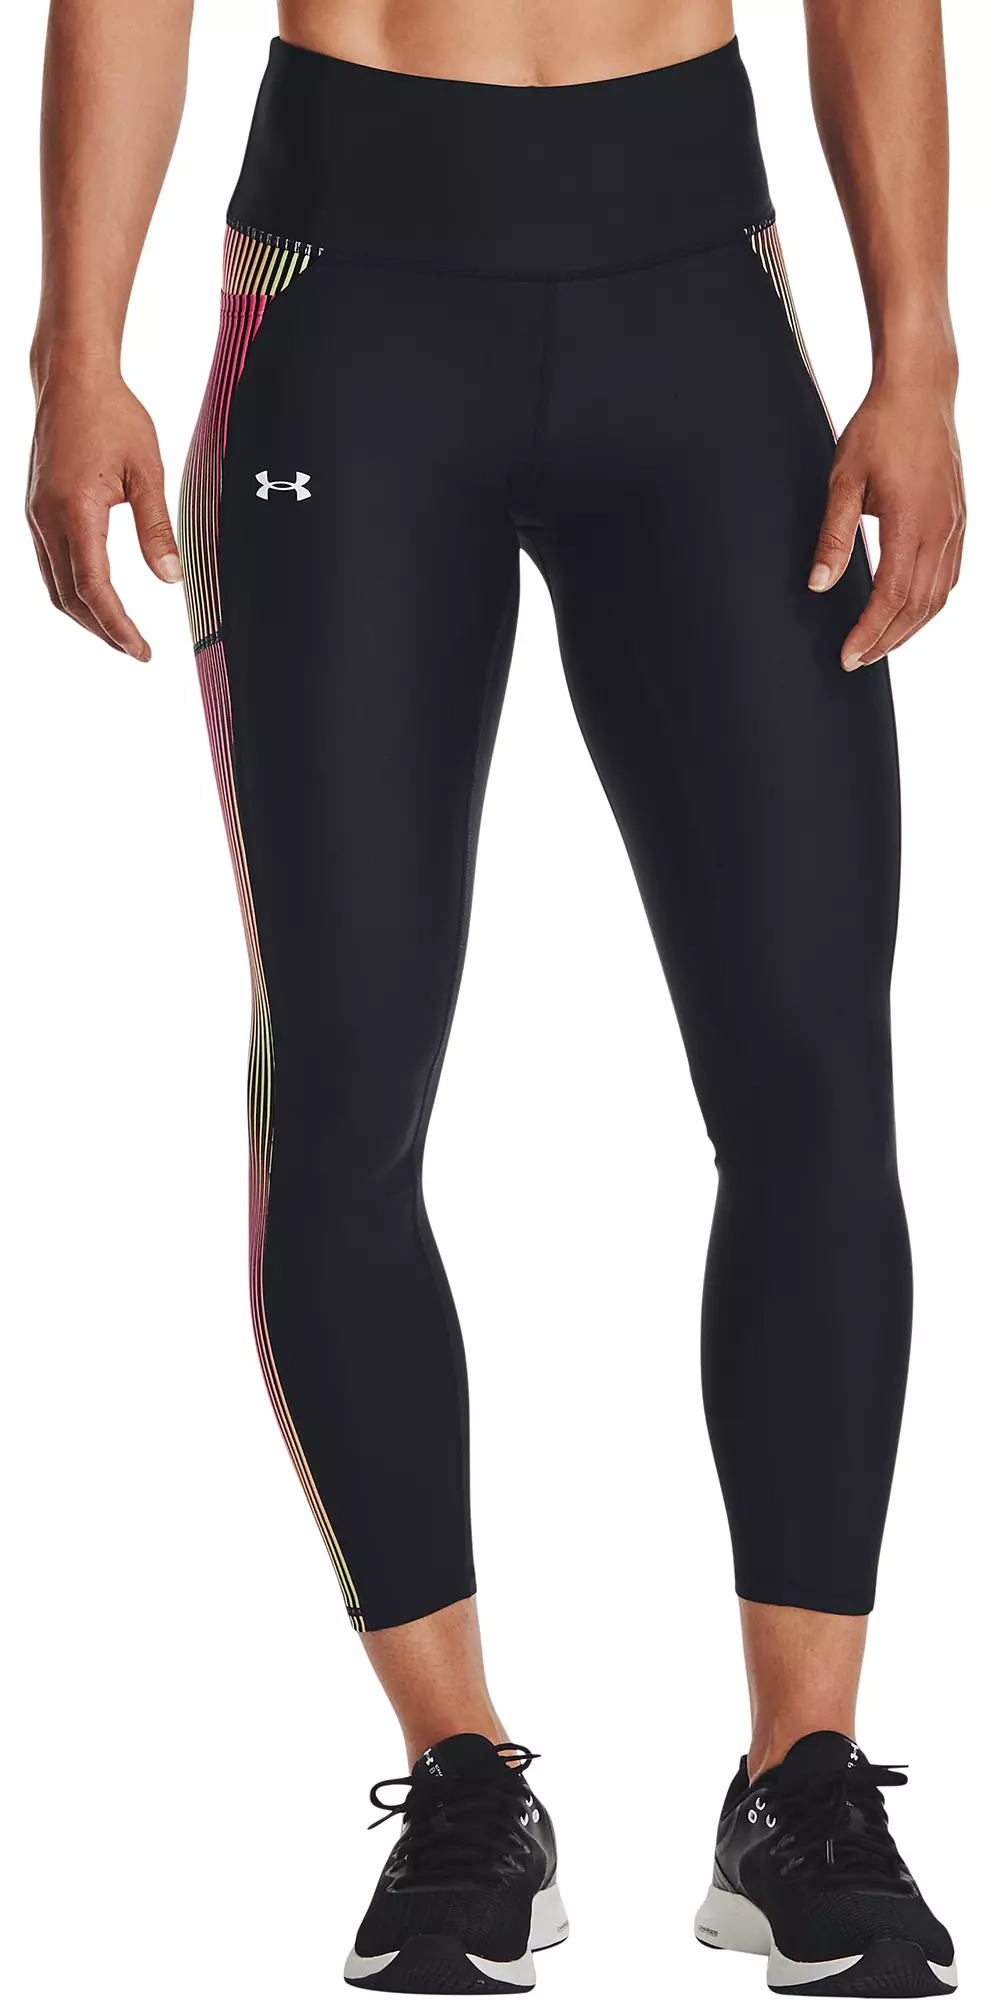 Under Armour Plus Heatgear Leggings With Side Panel In Black, 1367975-002